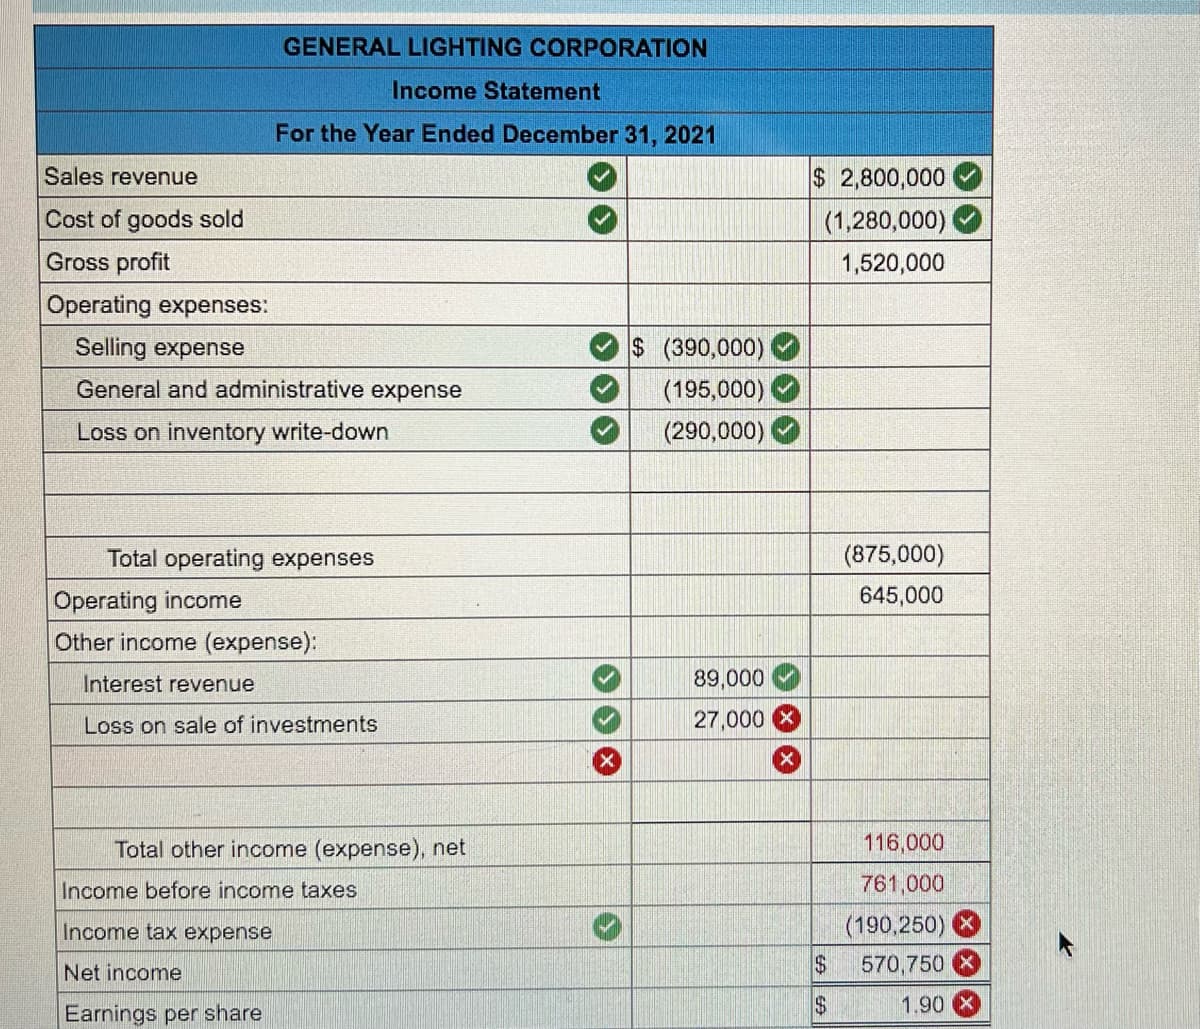 GENERAL LIGHTING CORPORATION
Income Statement
For the Year Ended December 31, 2021
Sales revenue
$ 2,800,000
Cost of goods sold
(1,280,000)
Gross profit
1,520,000
Operating expenses:
Selling expense
$(390,000)
General and administrative expense
(195,000)
Loss on inventory write-down
(290,000)
Total operating expenses
(875,000)
Operating income
645,000
Other income (expense):
Interest revenue
89,000
Loss on sale of investments
27,000
Total other income (expense), net
116,000
Income before income taxes
761,000
Income tax expense
(190,250)
Net income
$
570,750
1.90
Earnings per share
